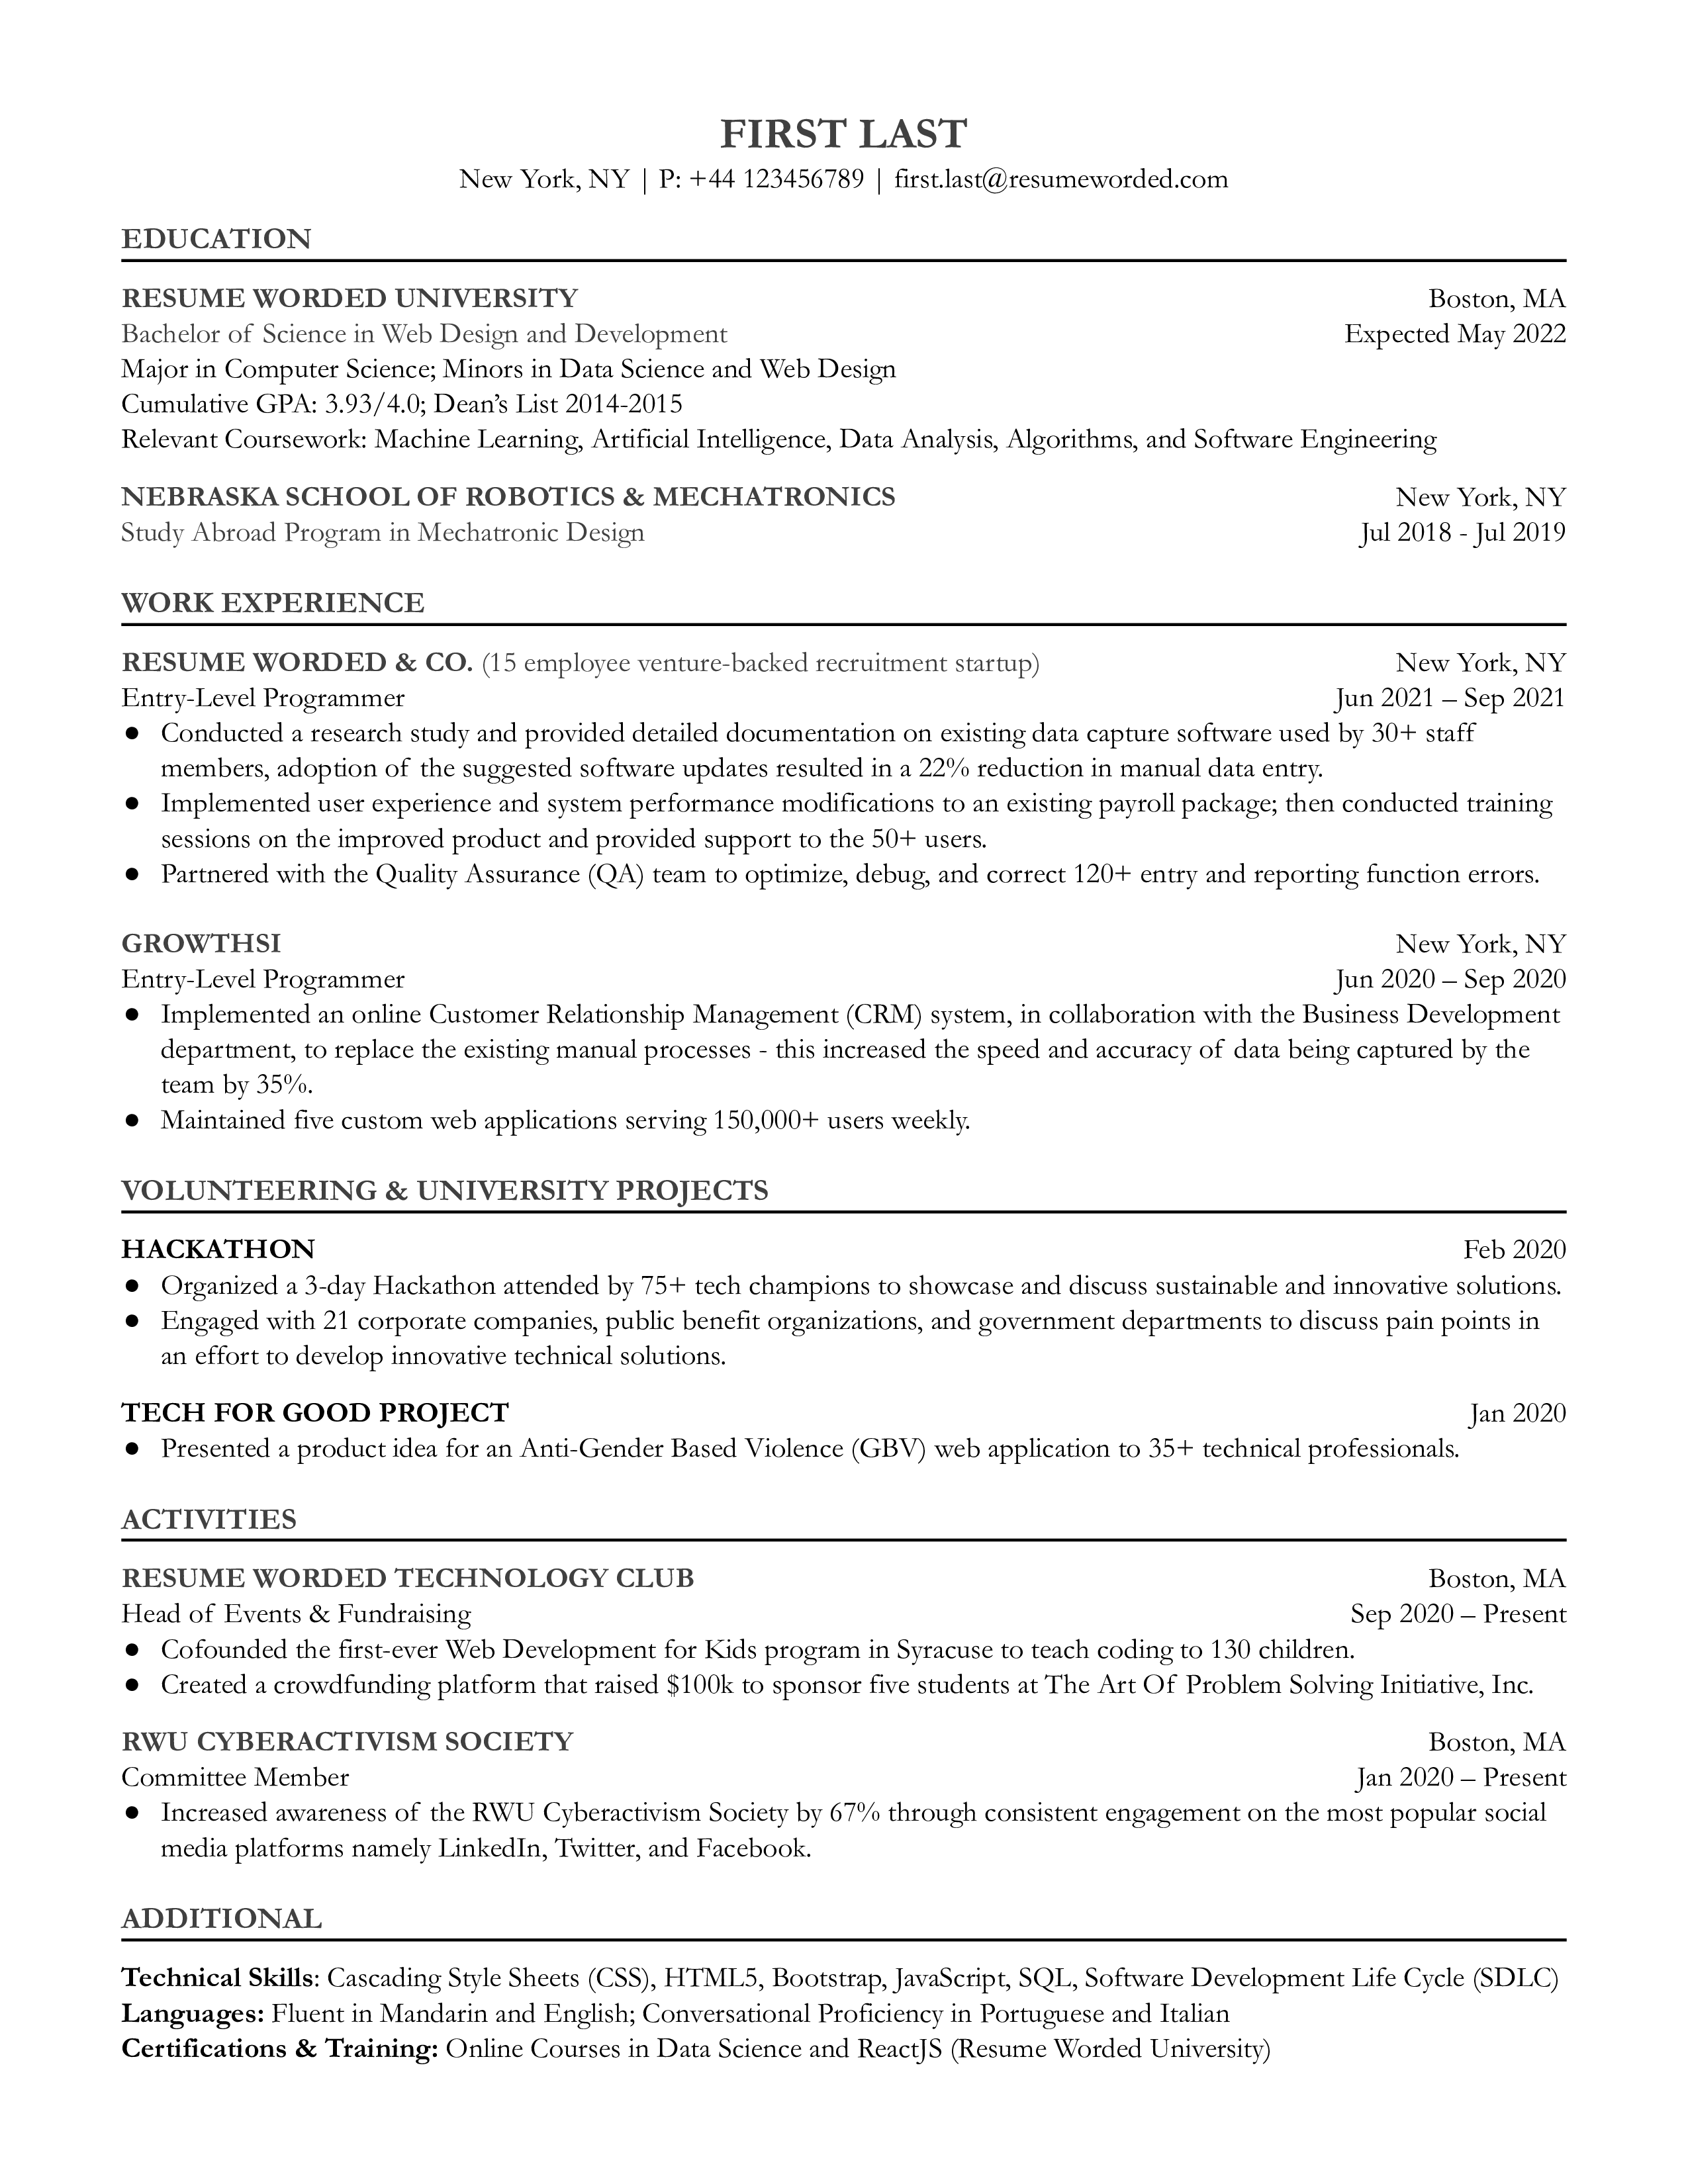 An entry-level programmer's CV showcasing relevant projects and soft skills.